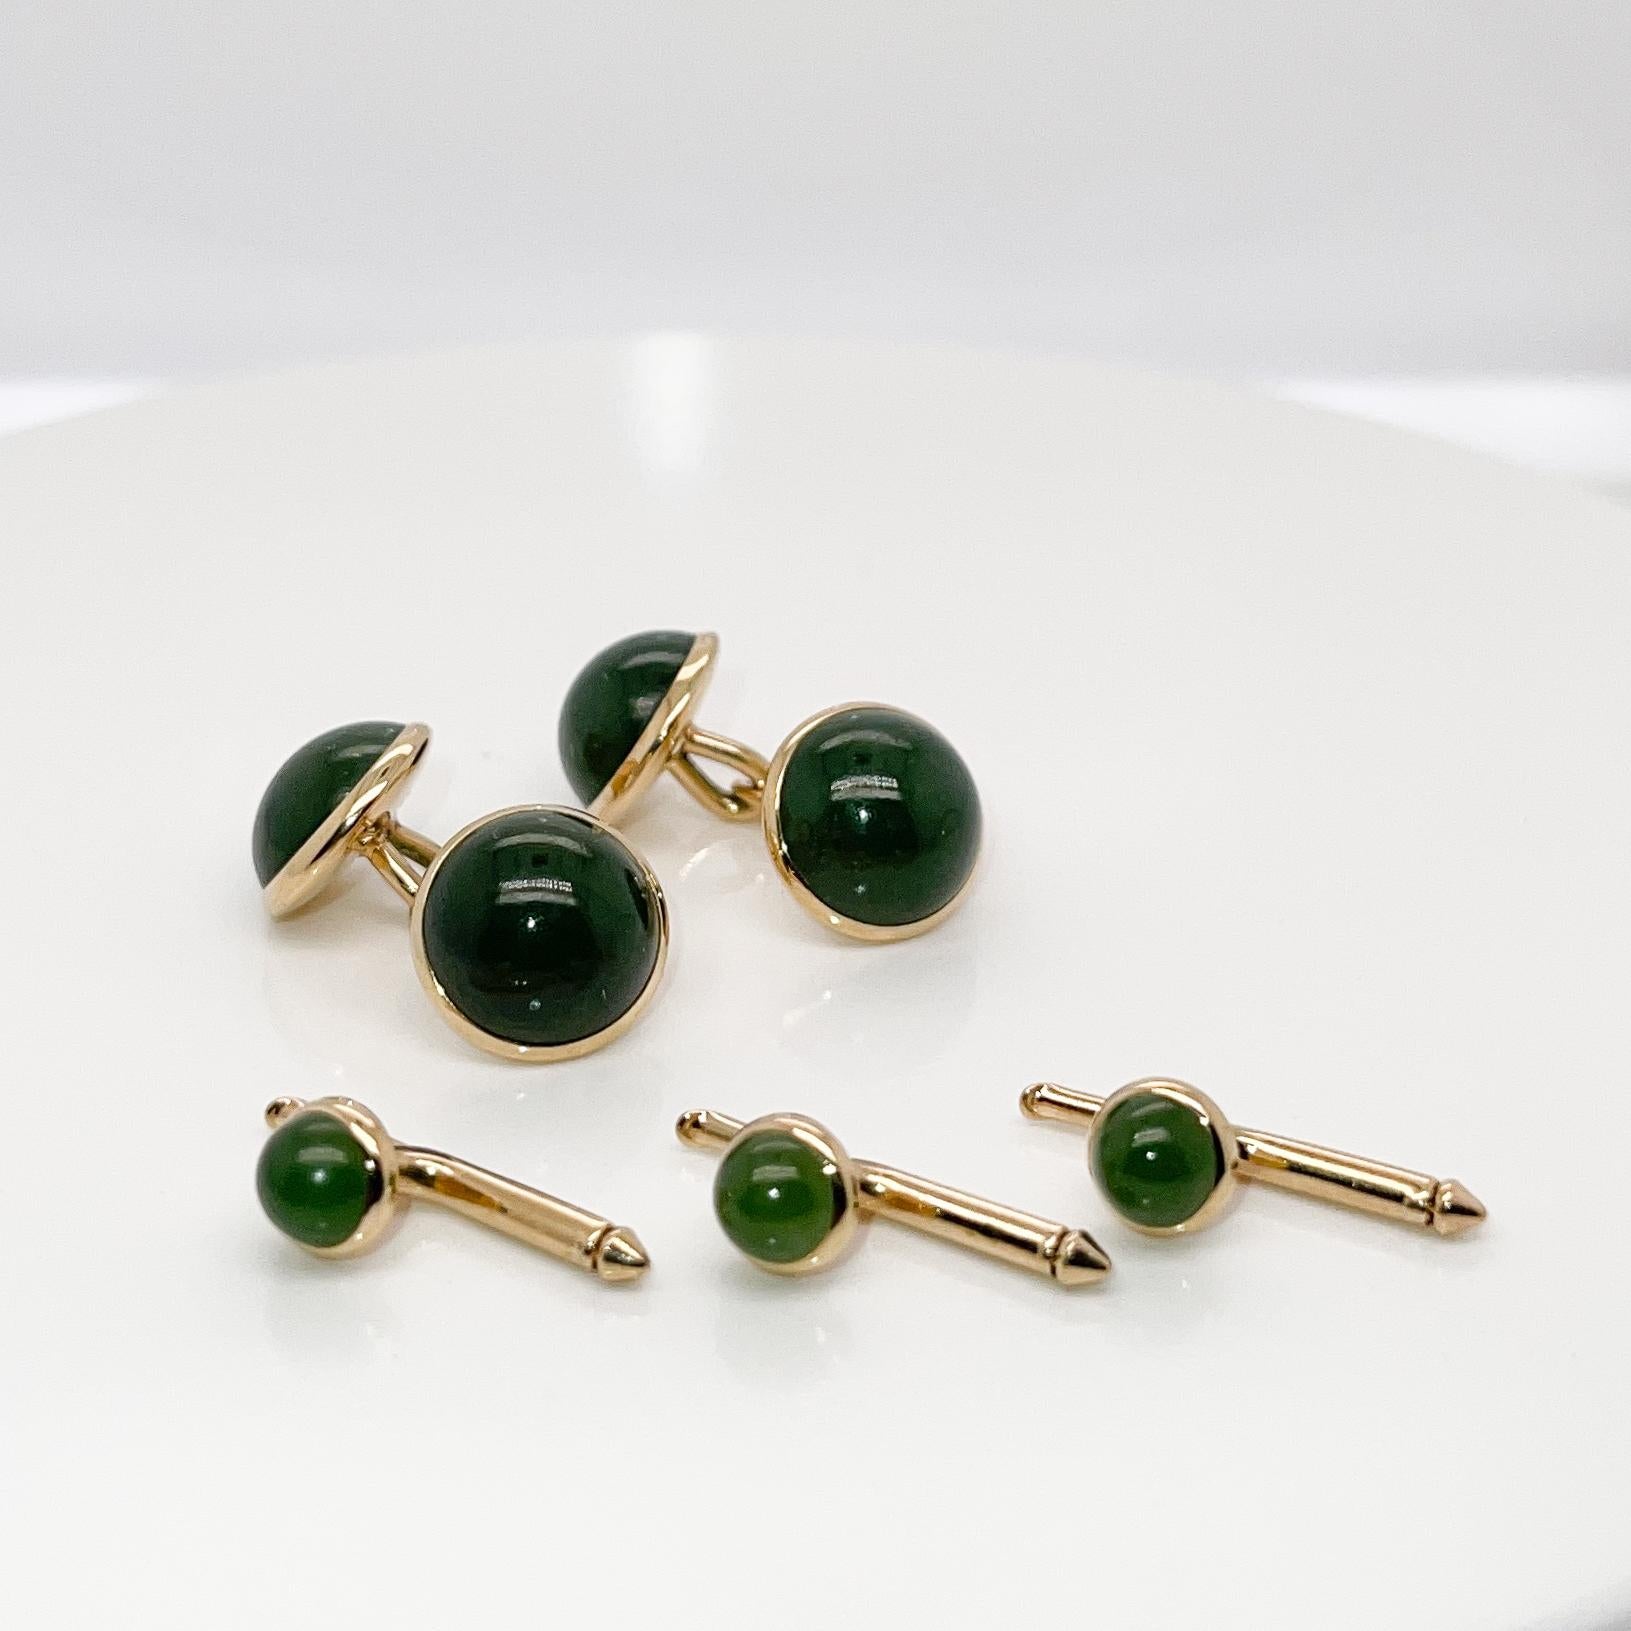 A very fine signed, antique American dress set.

Comprised of a pair of Carrington & Co. cufflinks together with 3 associated Larter & Sons buttons.

With smooth round nephrite cabochons bezel set in 14k gold. 

Simply a wonderful, high-level set